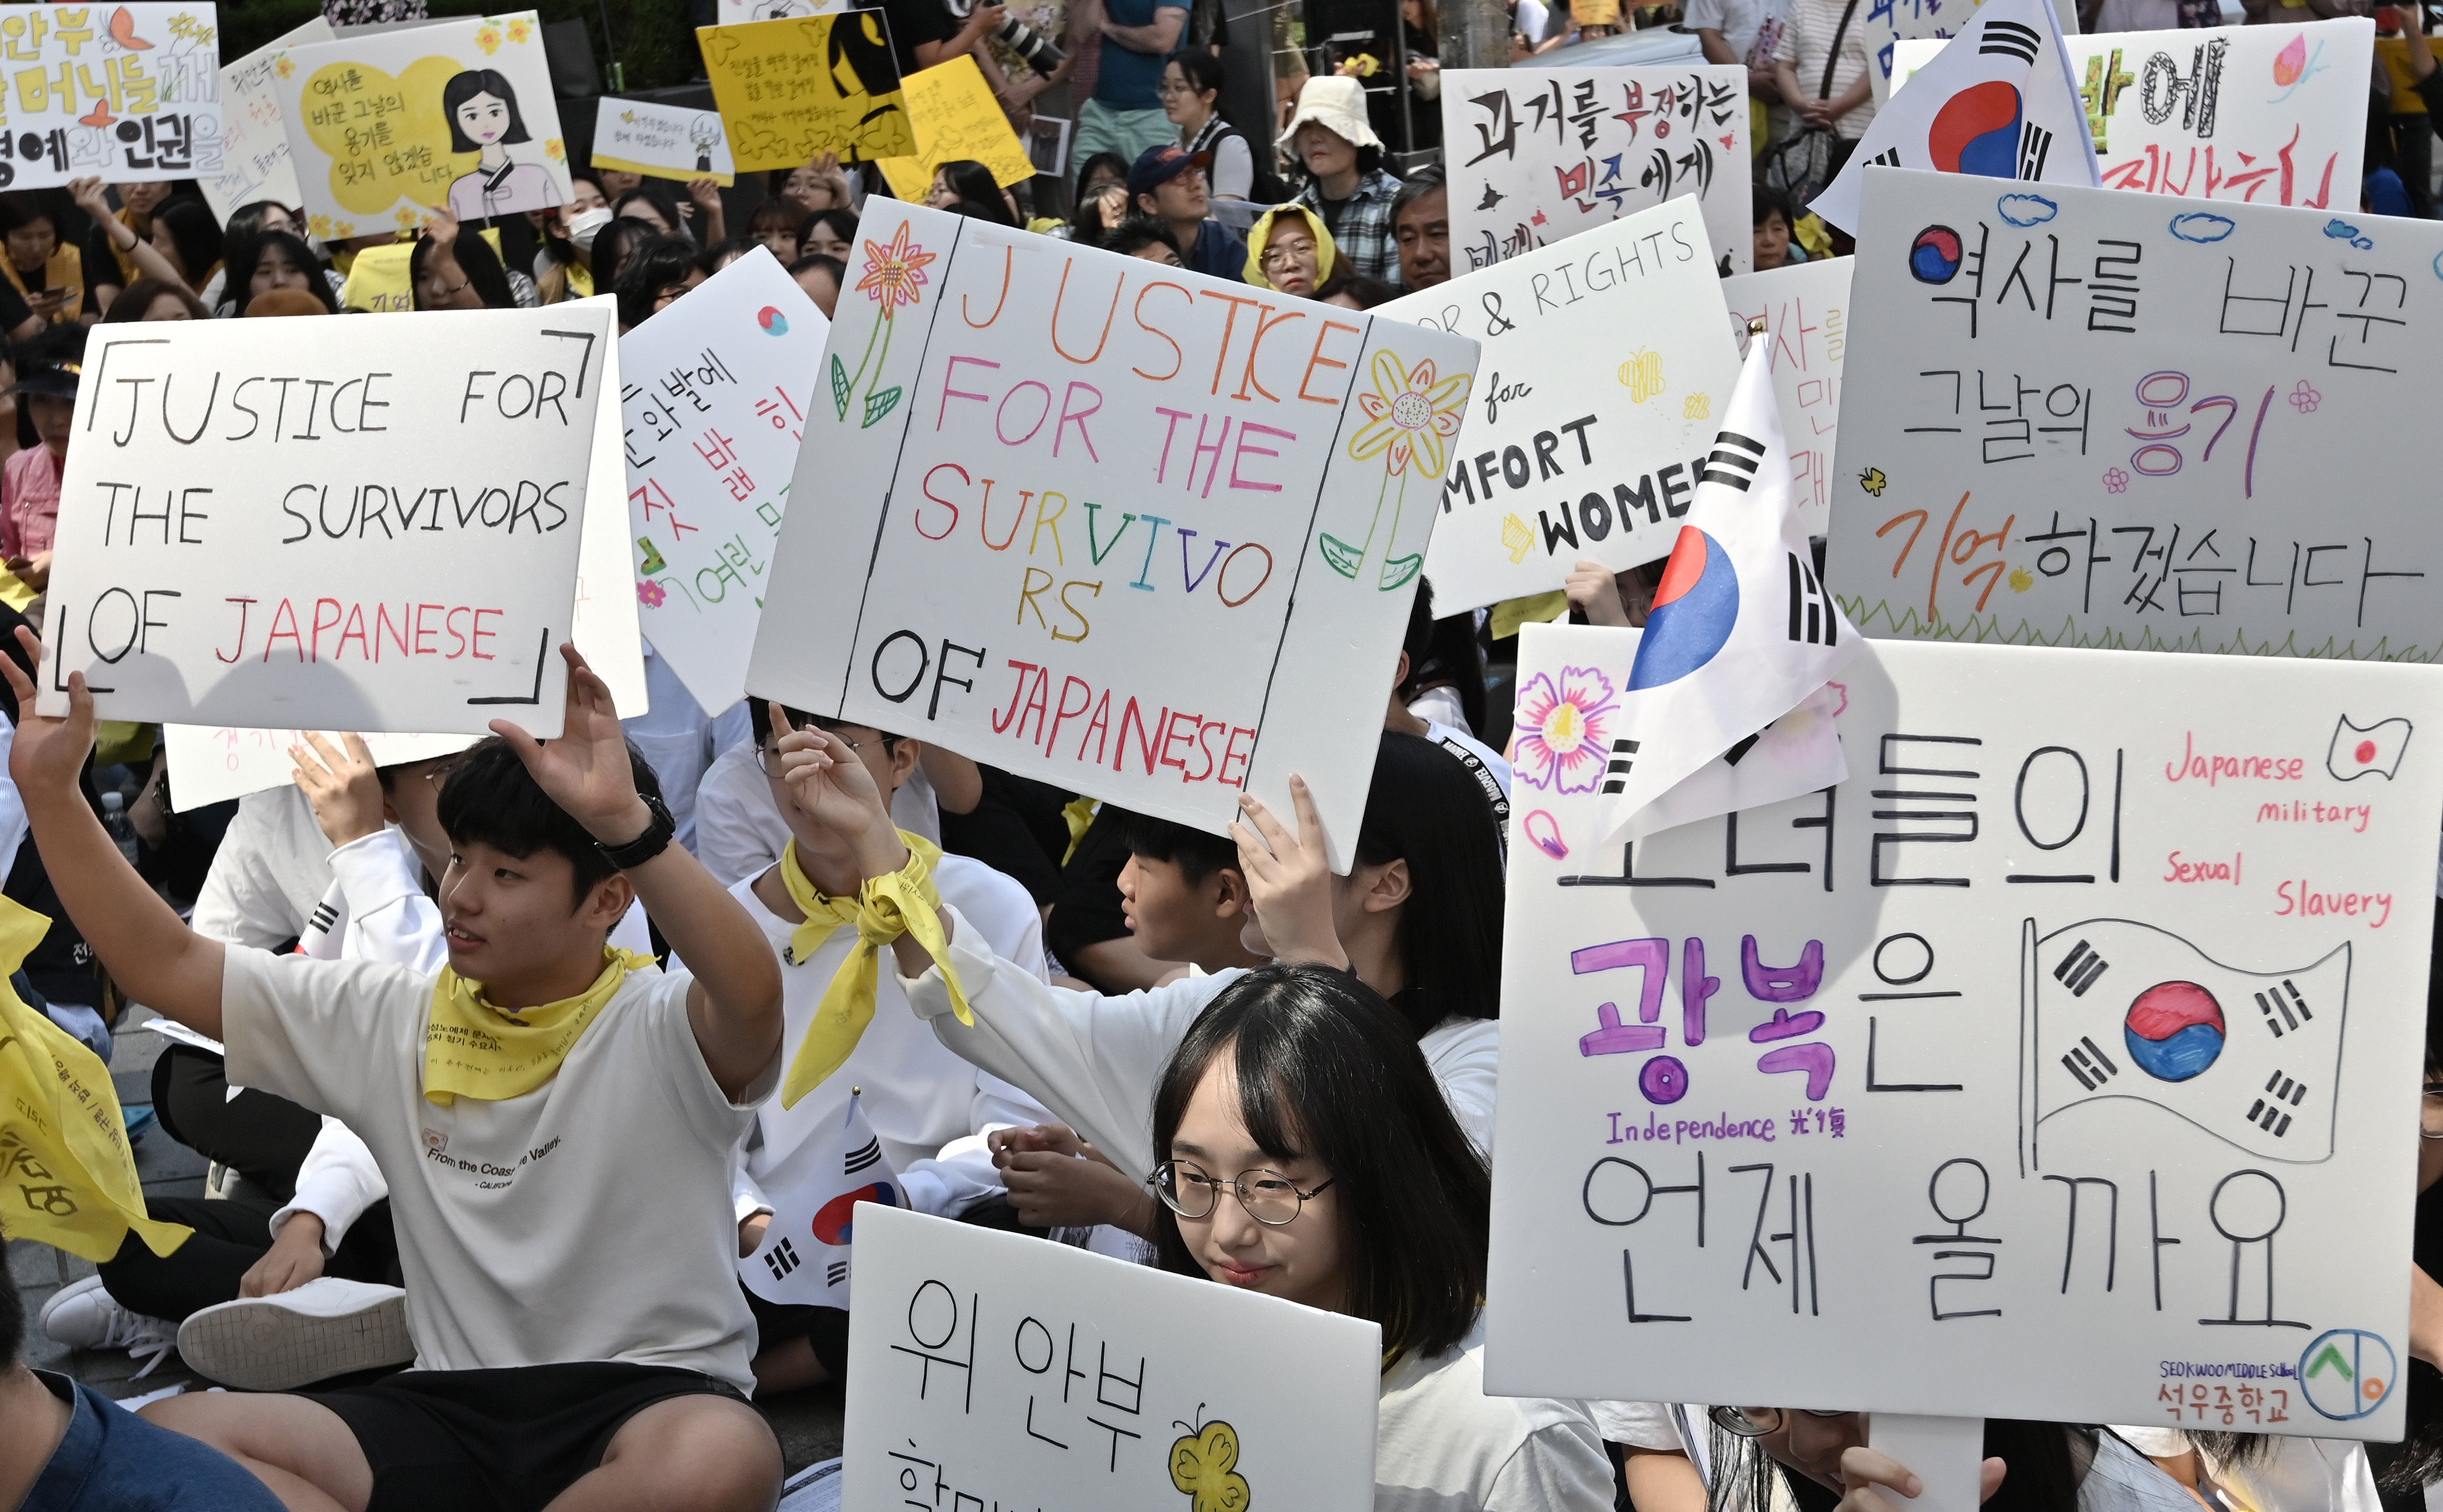 File Image: Supporters of former ‘comfort women’, who were forced to serve as sex slaves for Japanese troops during World War II, hold placards during a demonstration demanding the Japanese government's formal apology near the Japanese embassy in Seoul on 18 September 2019